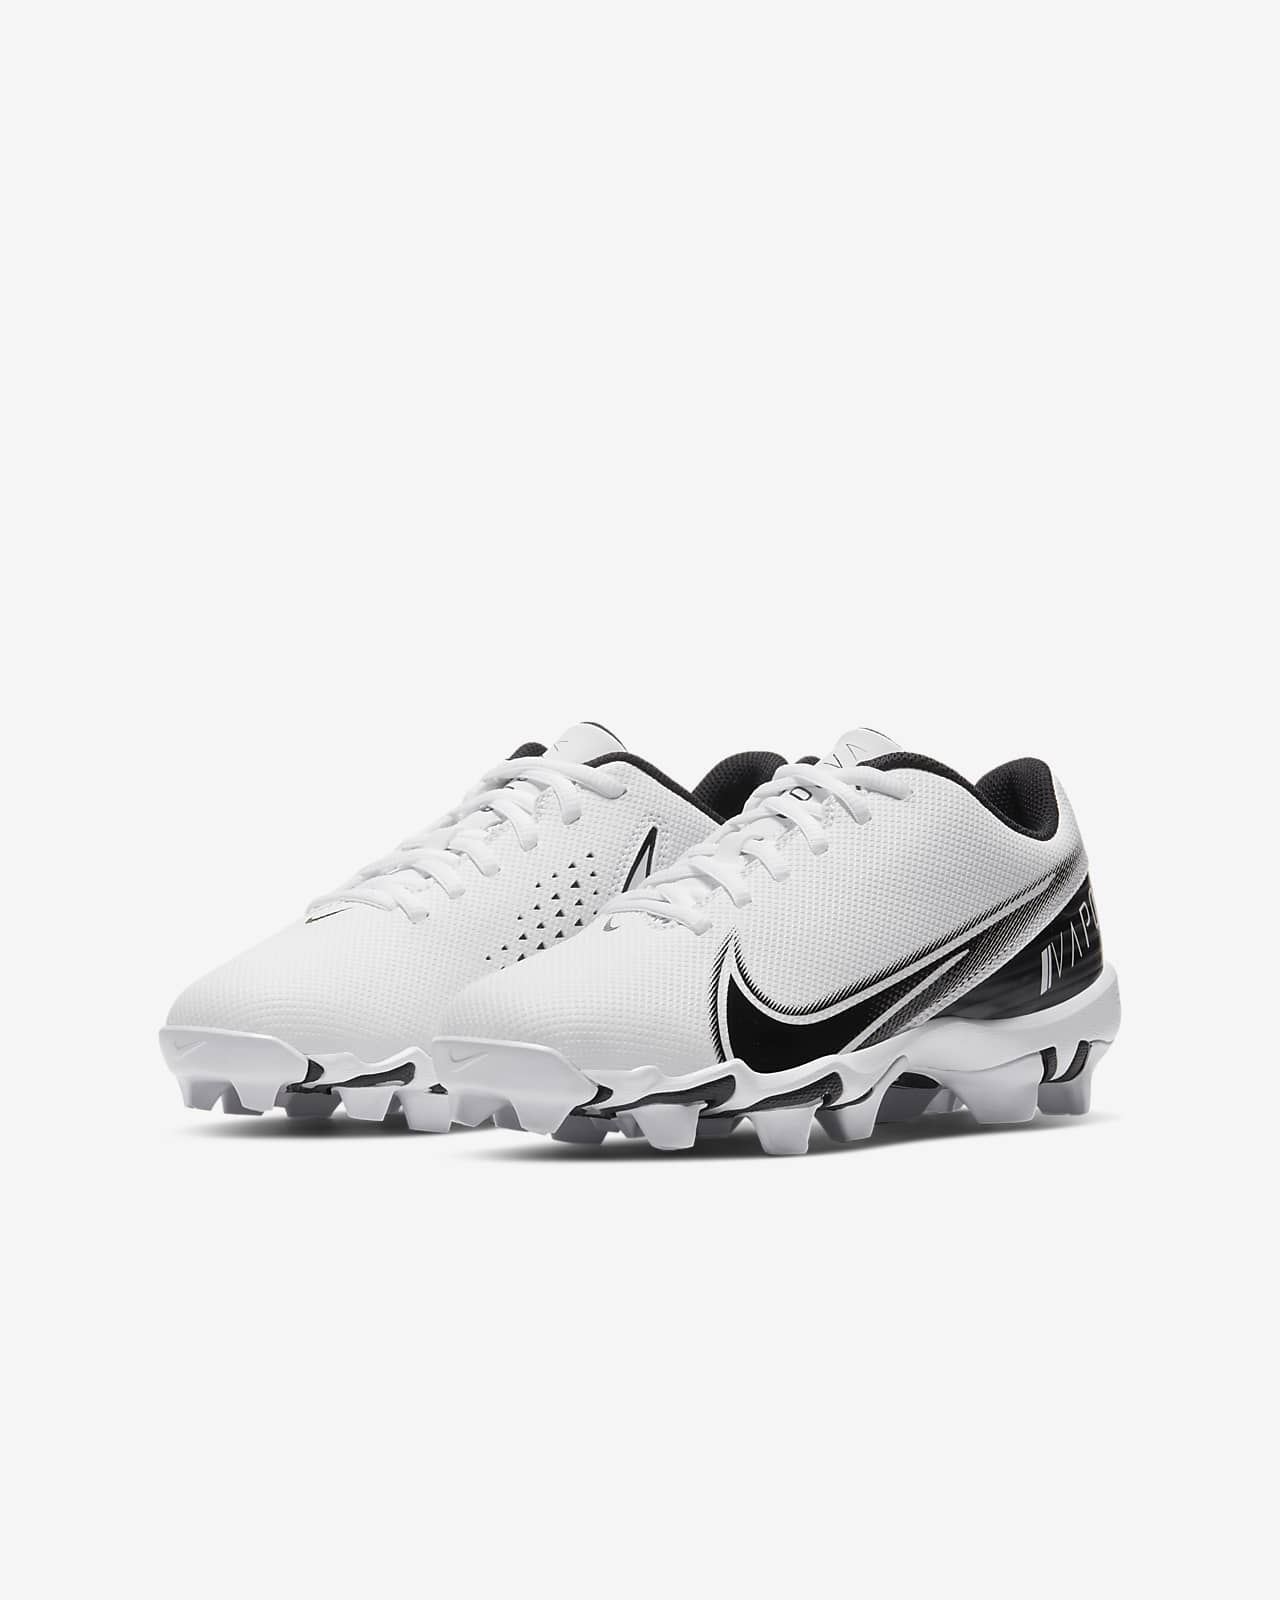 youth nike cleats